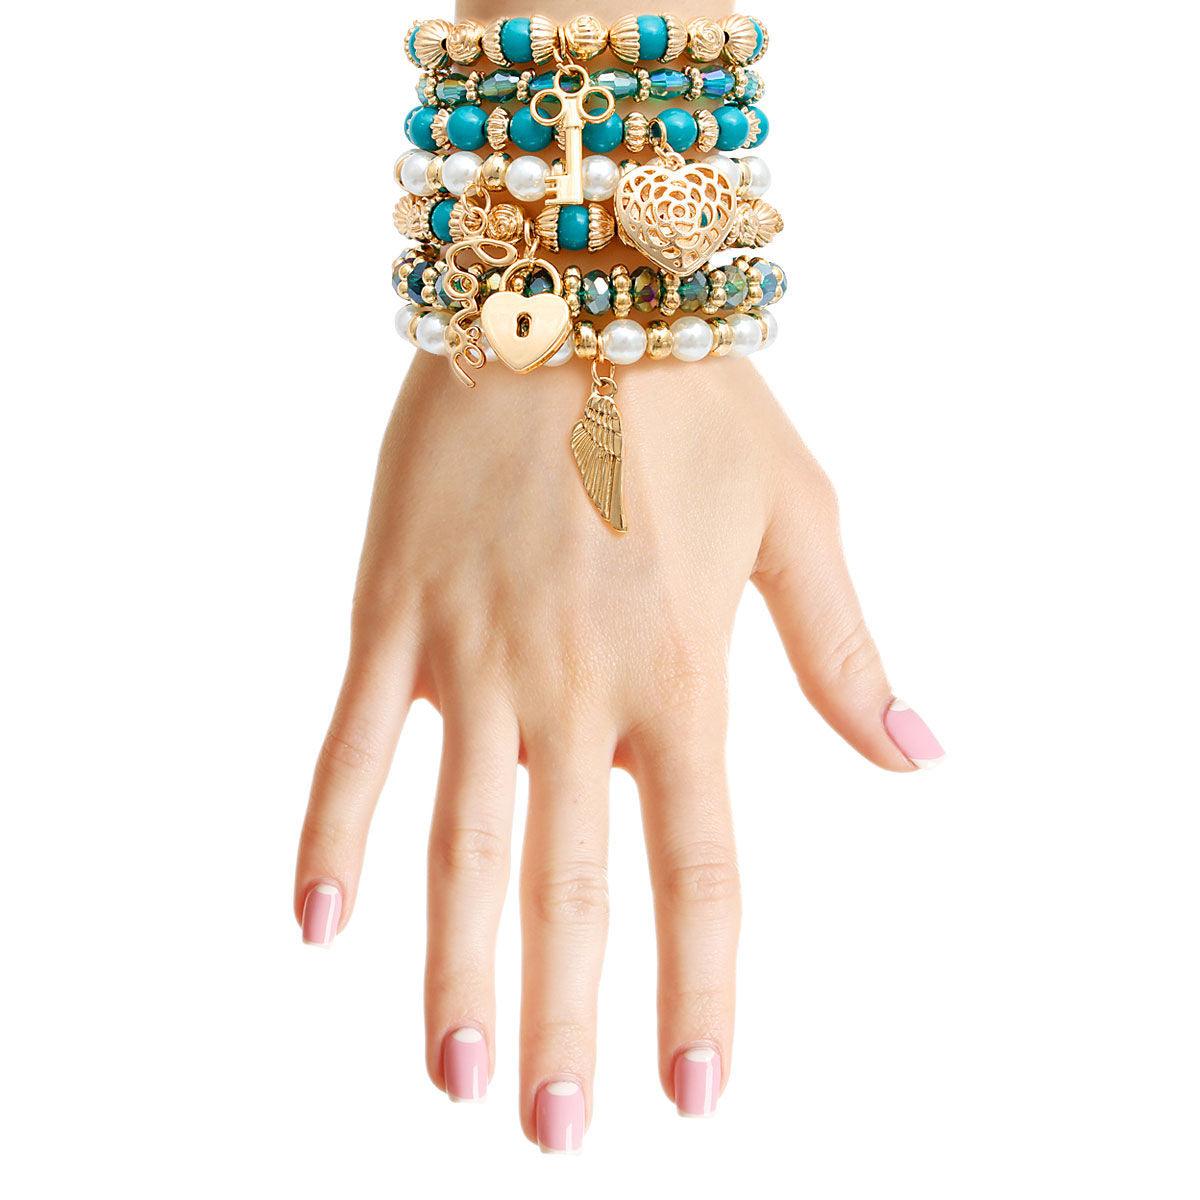 Teal, Faux Pearl Bracelets: Add a Touch of Elegance to Your Everyday Look